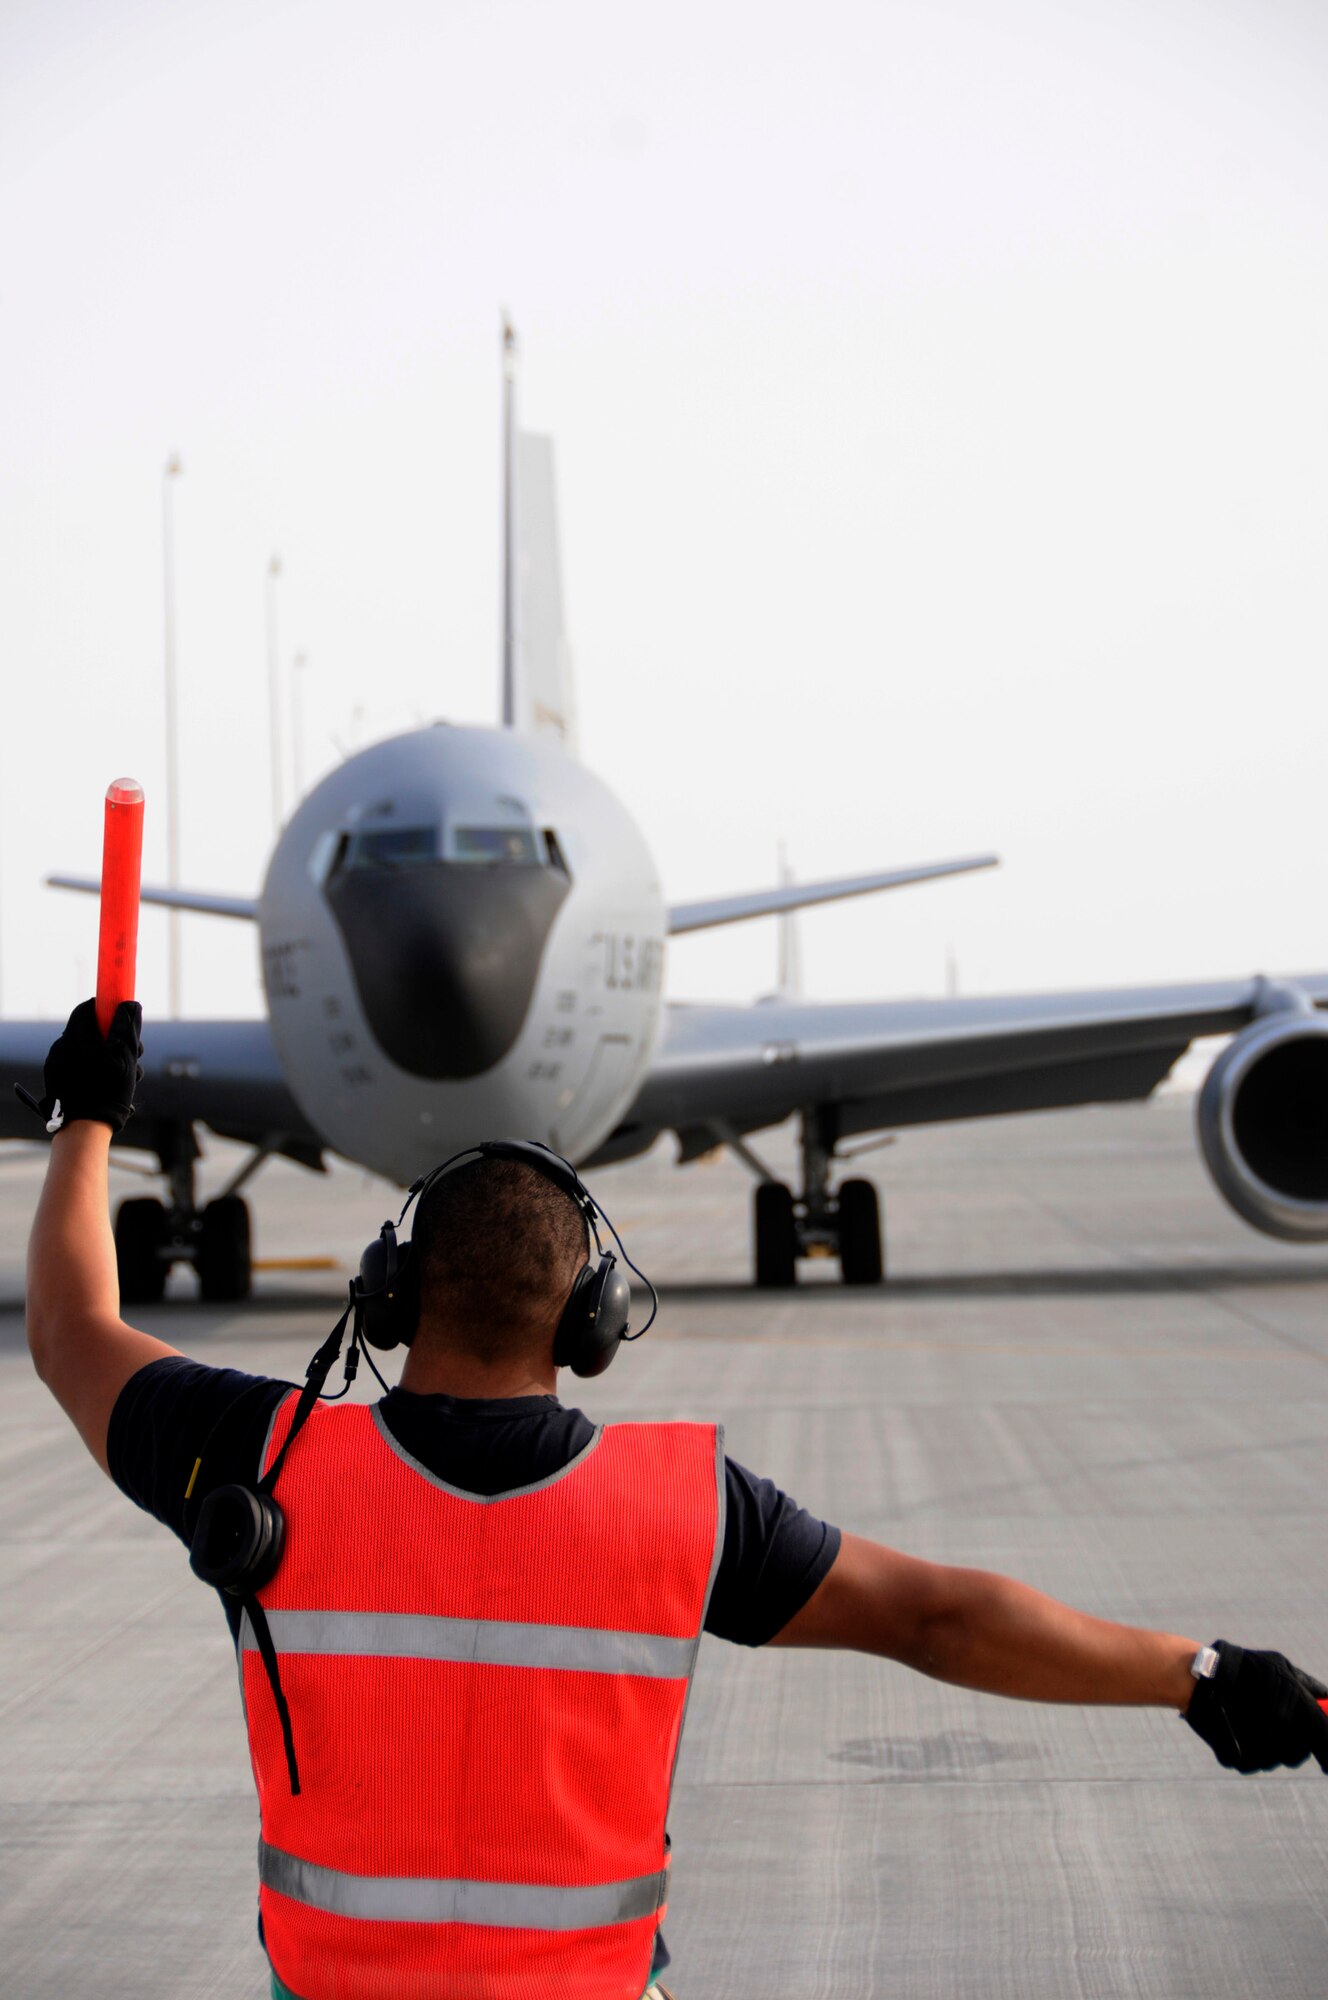 Senior Airman Michael Reyes, 379th Expeditionary Aircraft Maintenance Squadron, 340th Aircraft Maintenance Unit, signals the KC-135 Stratotanker to turn as it leaves its parking spot, taxiing off the ramp here at this undisclosed air base in Southwest Asia.  The KC-135 provides aerial refueling support to Air Force, Navy, Marine Corps and allied nation aircraft engaged in Operations Iraqi and Enduring Freedom and Joint Task Force-Horn of Africa.  Airman Reyes, a native of Temecula, Calif., is deployed from McConnell AFB, Kan. (U.S. Air Force photo by Tech. Sgt. Michael Boquette/Released)